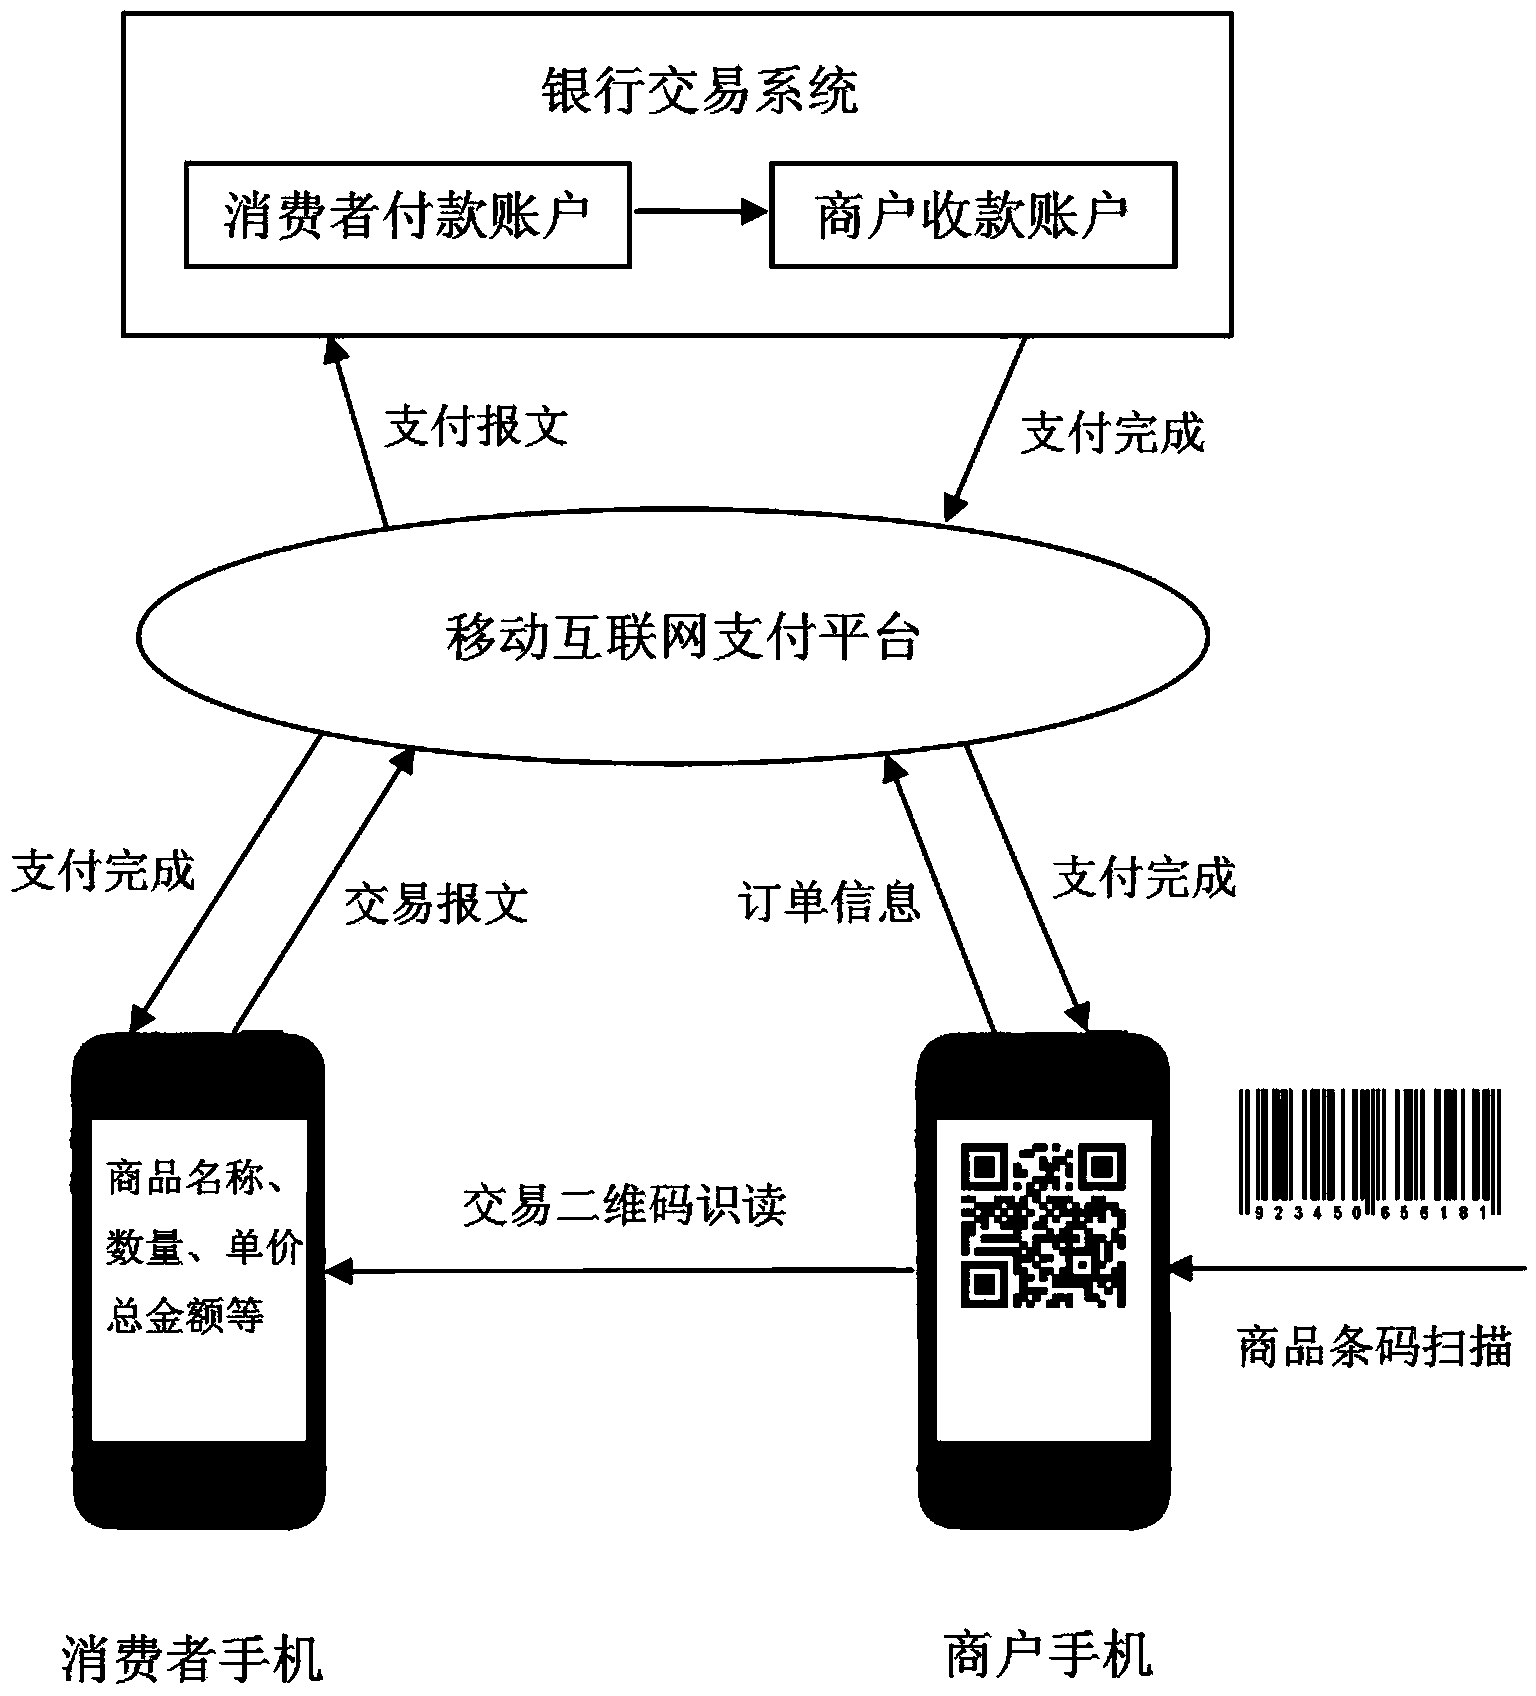 Mobile payment method for field shopping